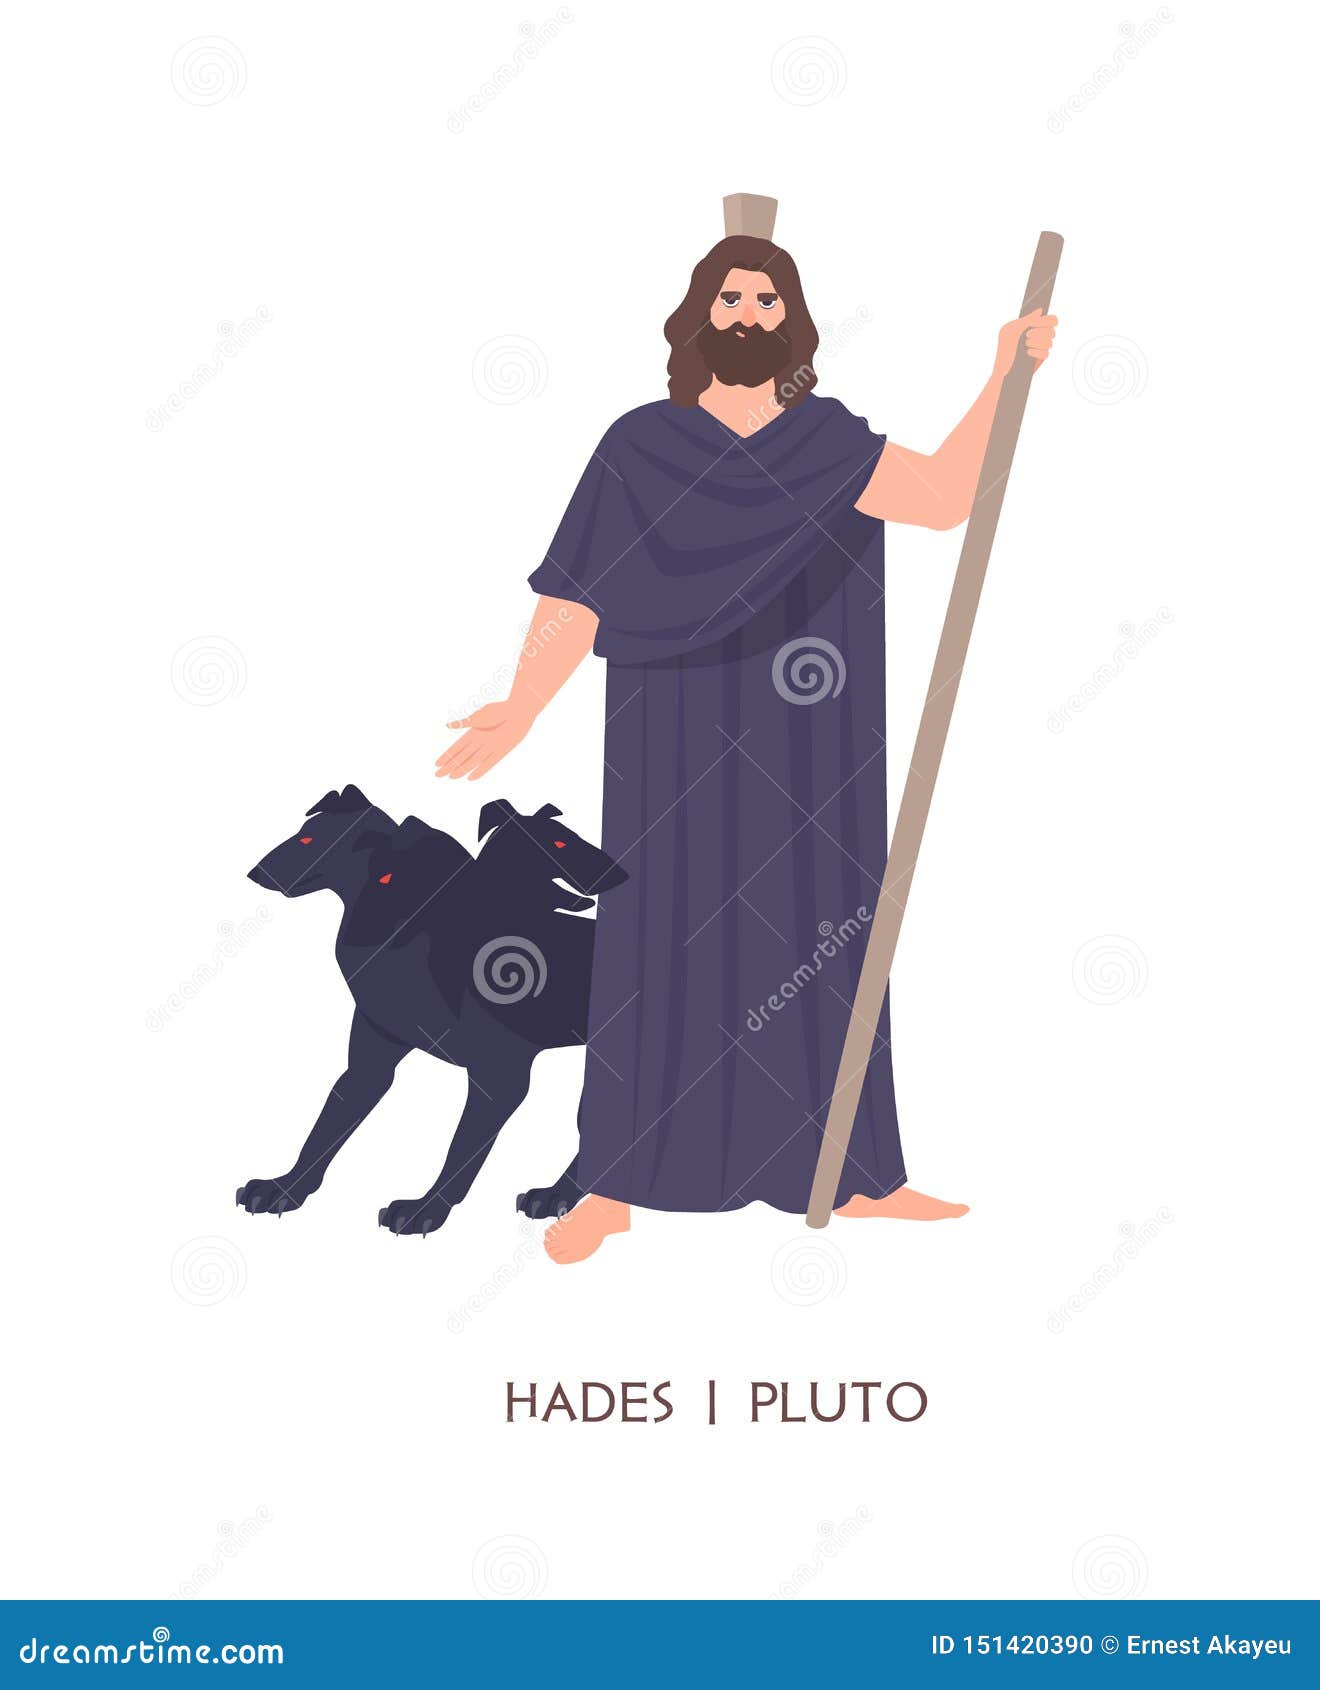 hades or pluto - god of dead, king of underworld in ancient greek and roman religion or mythology. male cartoon